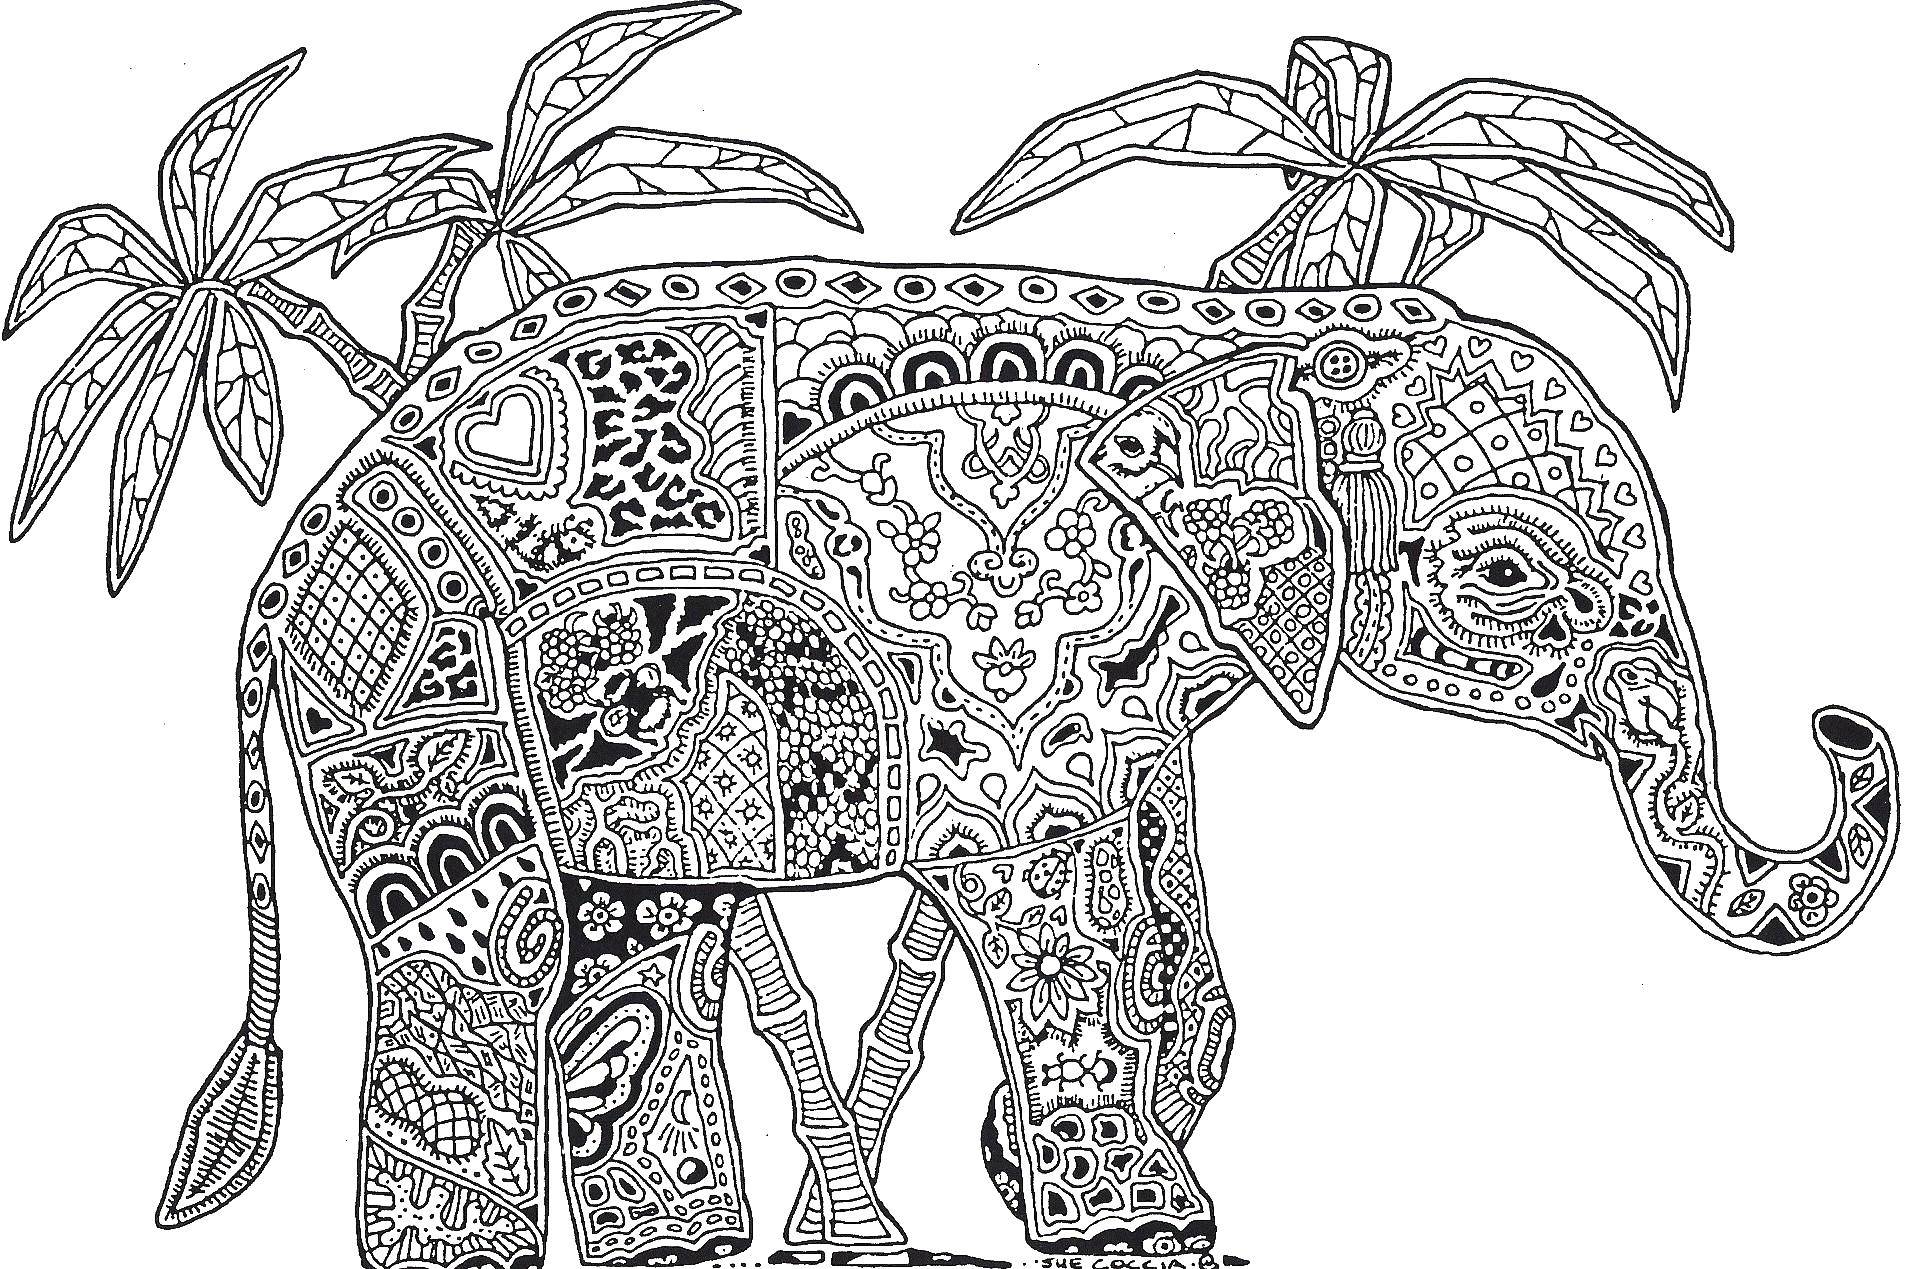 Coloring Elephant and palm trees. Category patterns. Tags:  patterns, palm trees, elephant.